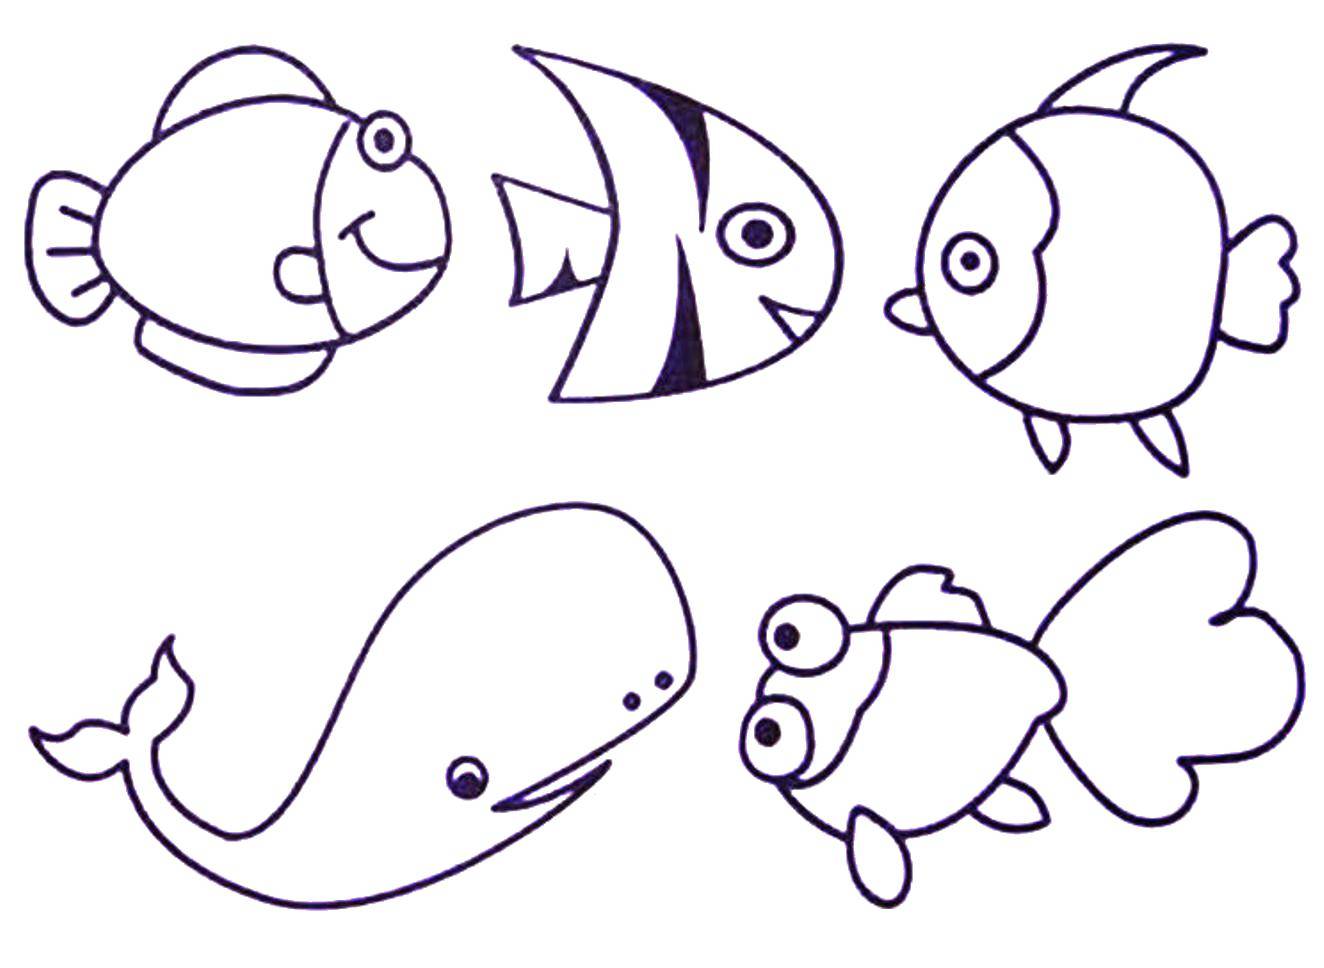 Coloring Fun underwater friends. Category Marine animals. Tags:  Underwater world, fish.